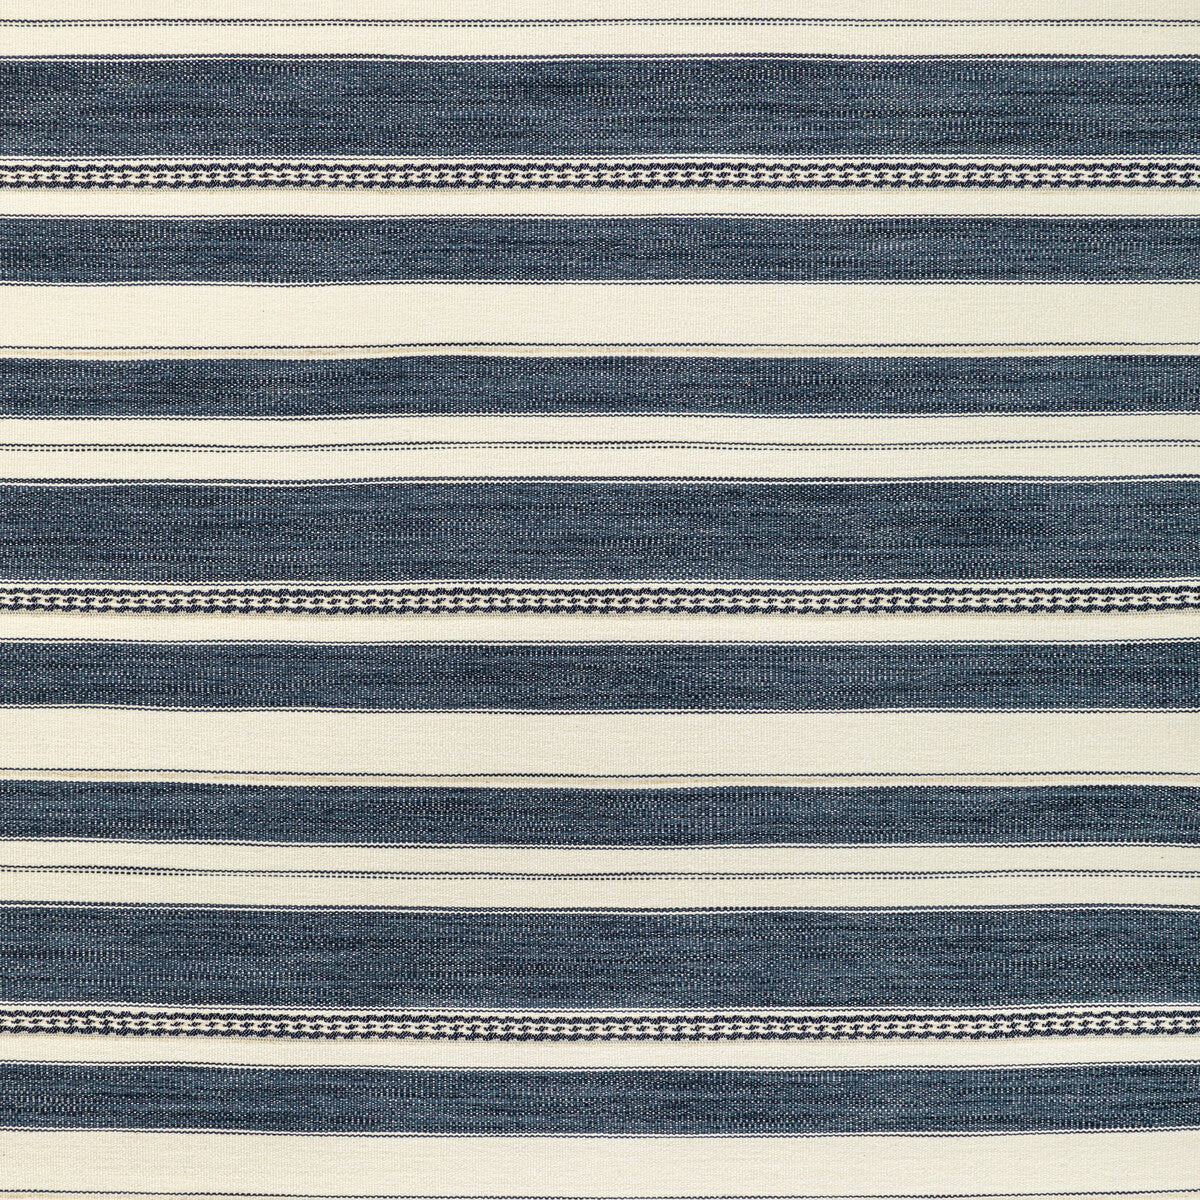 Entoto Stripe fabric in marine/ivory color - pattern 2017143.501.0 - by Lee Jofa in the Breckenridge collection